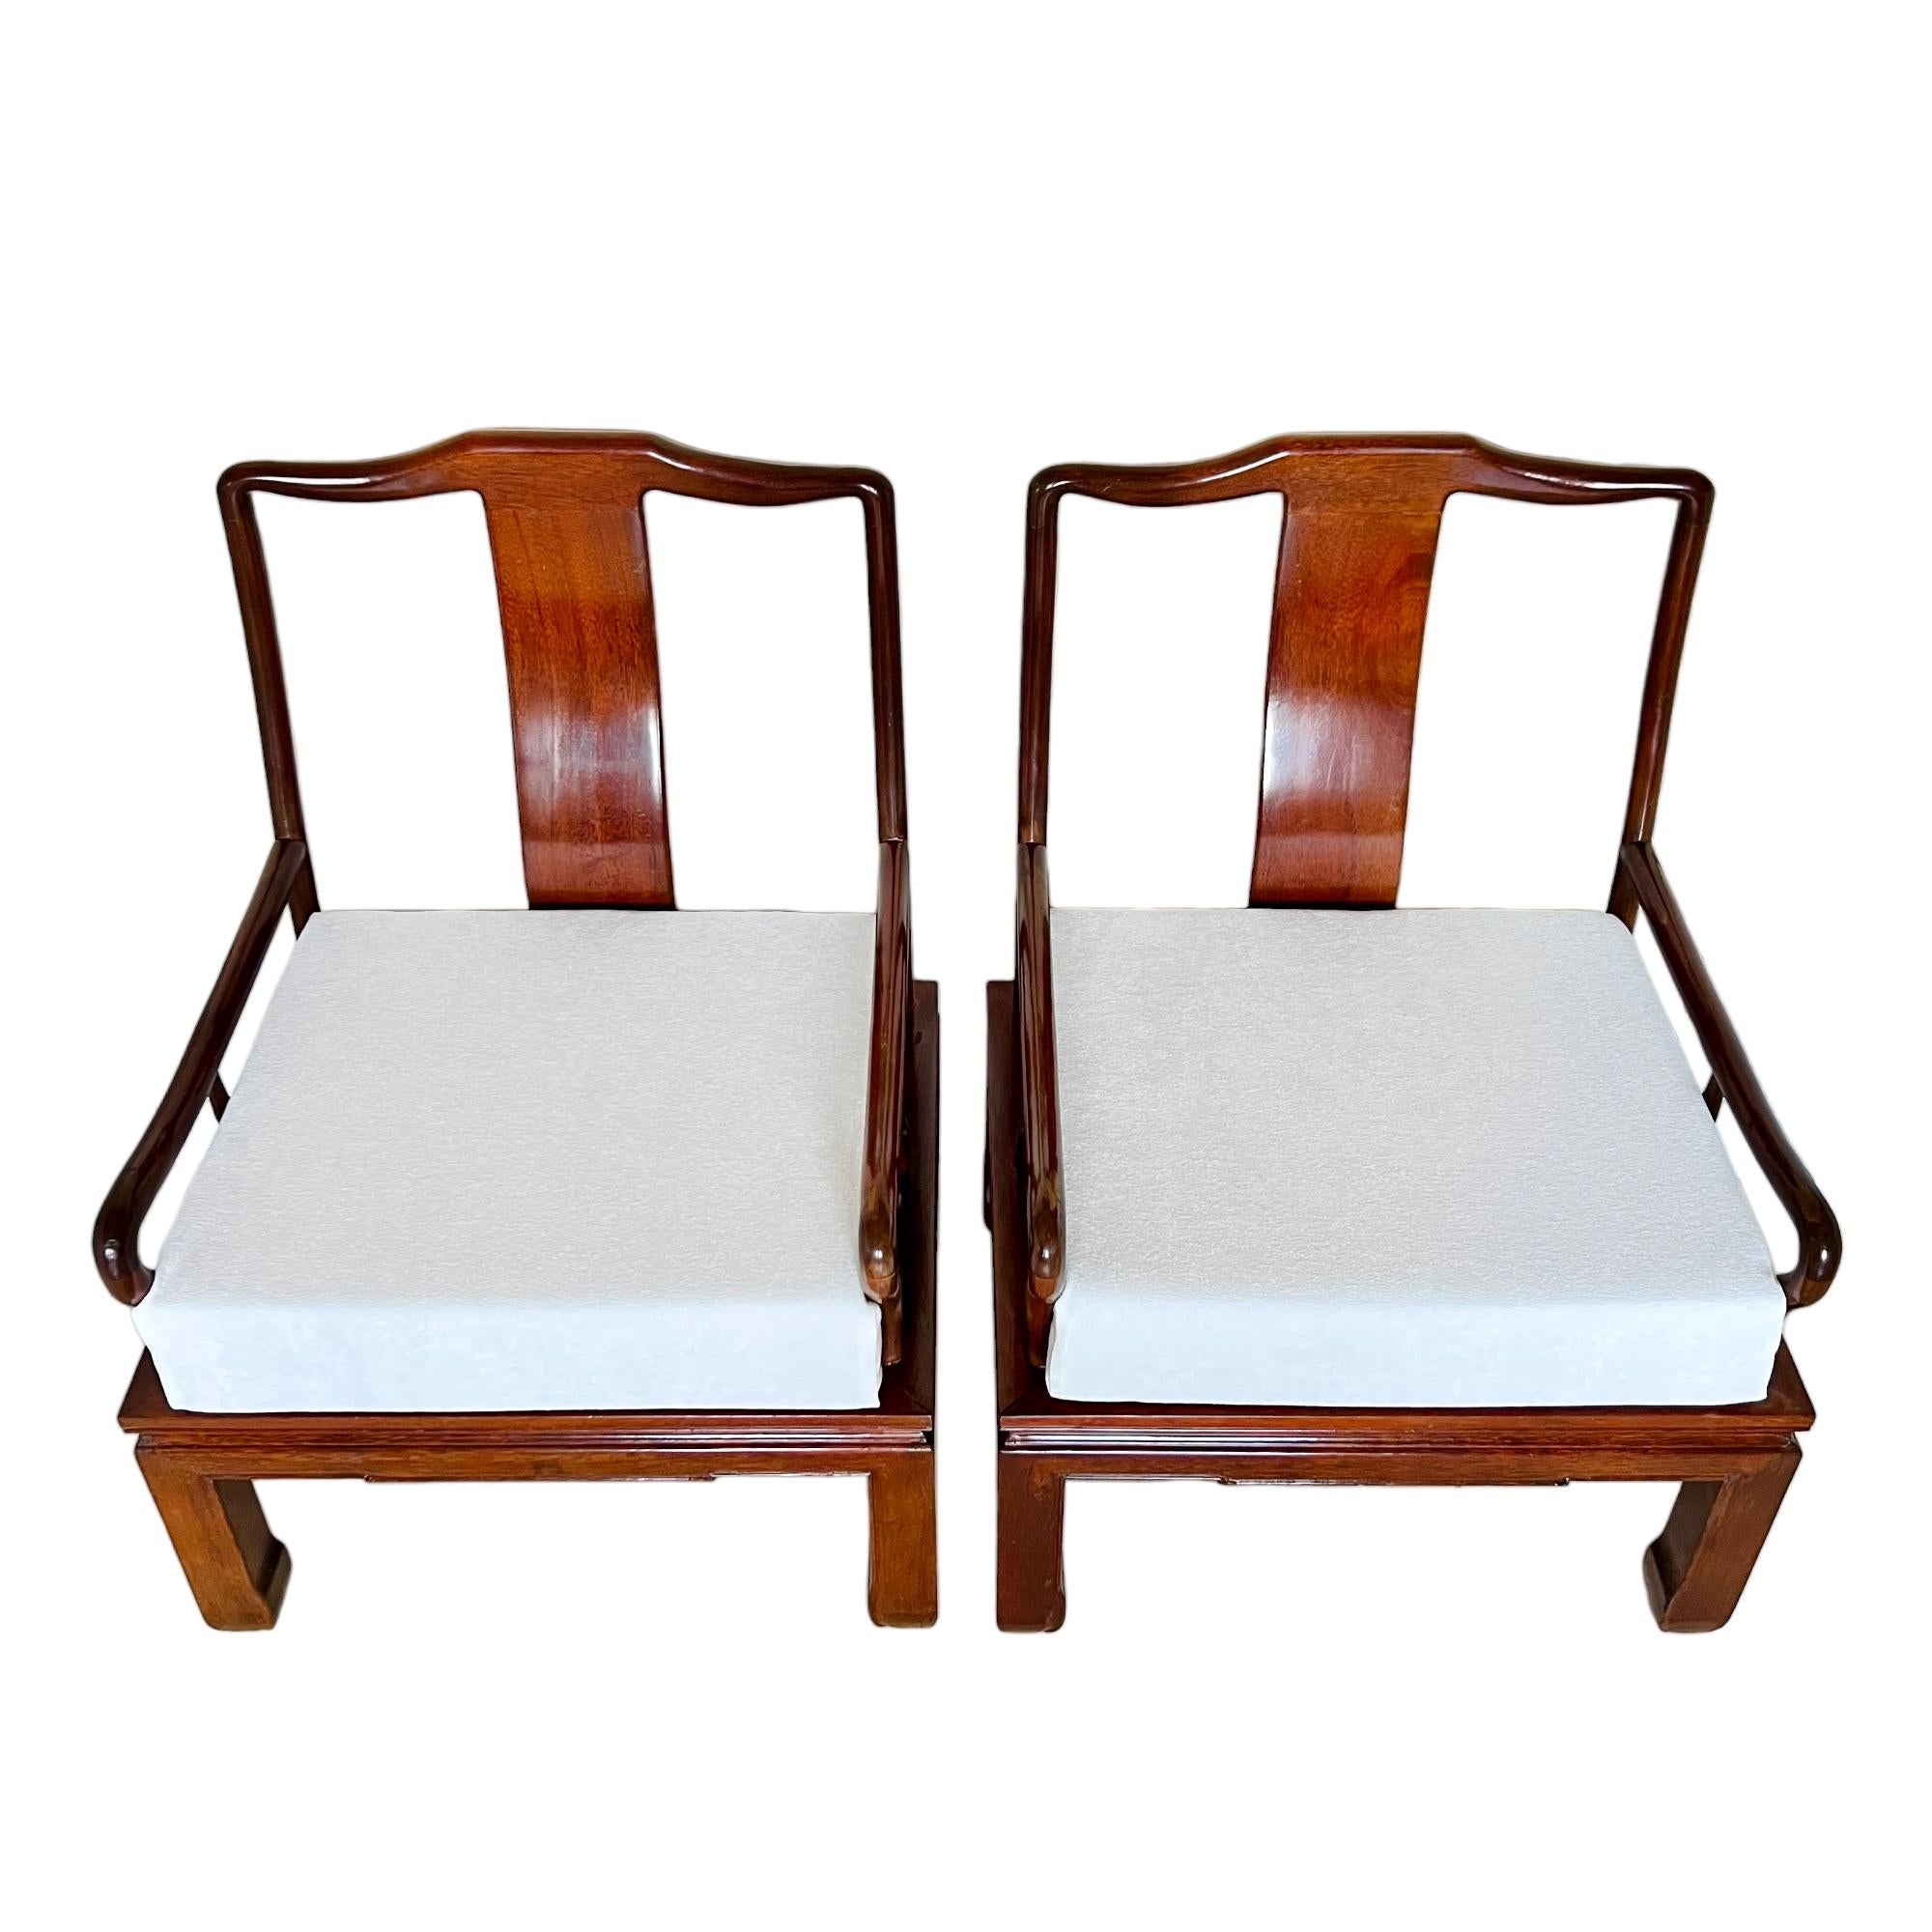 Carved Vintage Chinese Ming Style Arm Chairs, a Pair For Sale